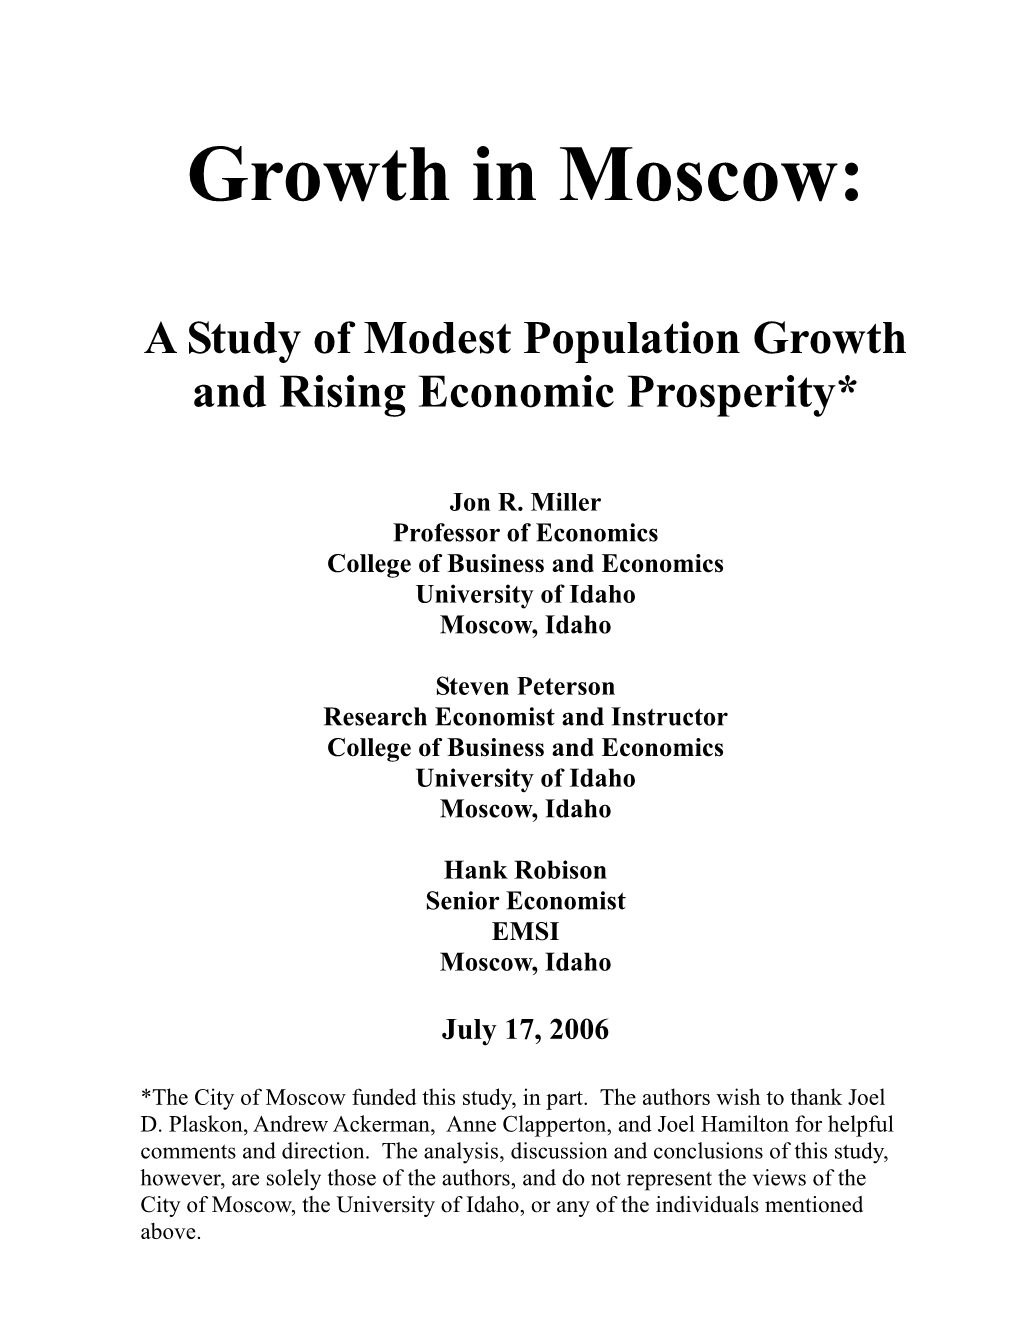 A Study of Modest Population Growth and Rising Economic Prosperity*